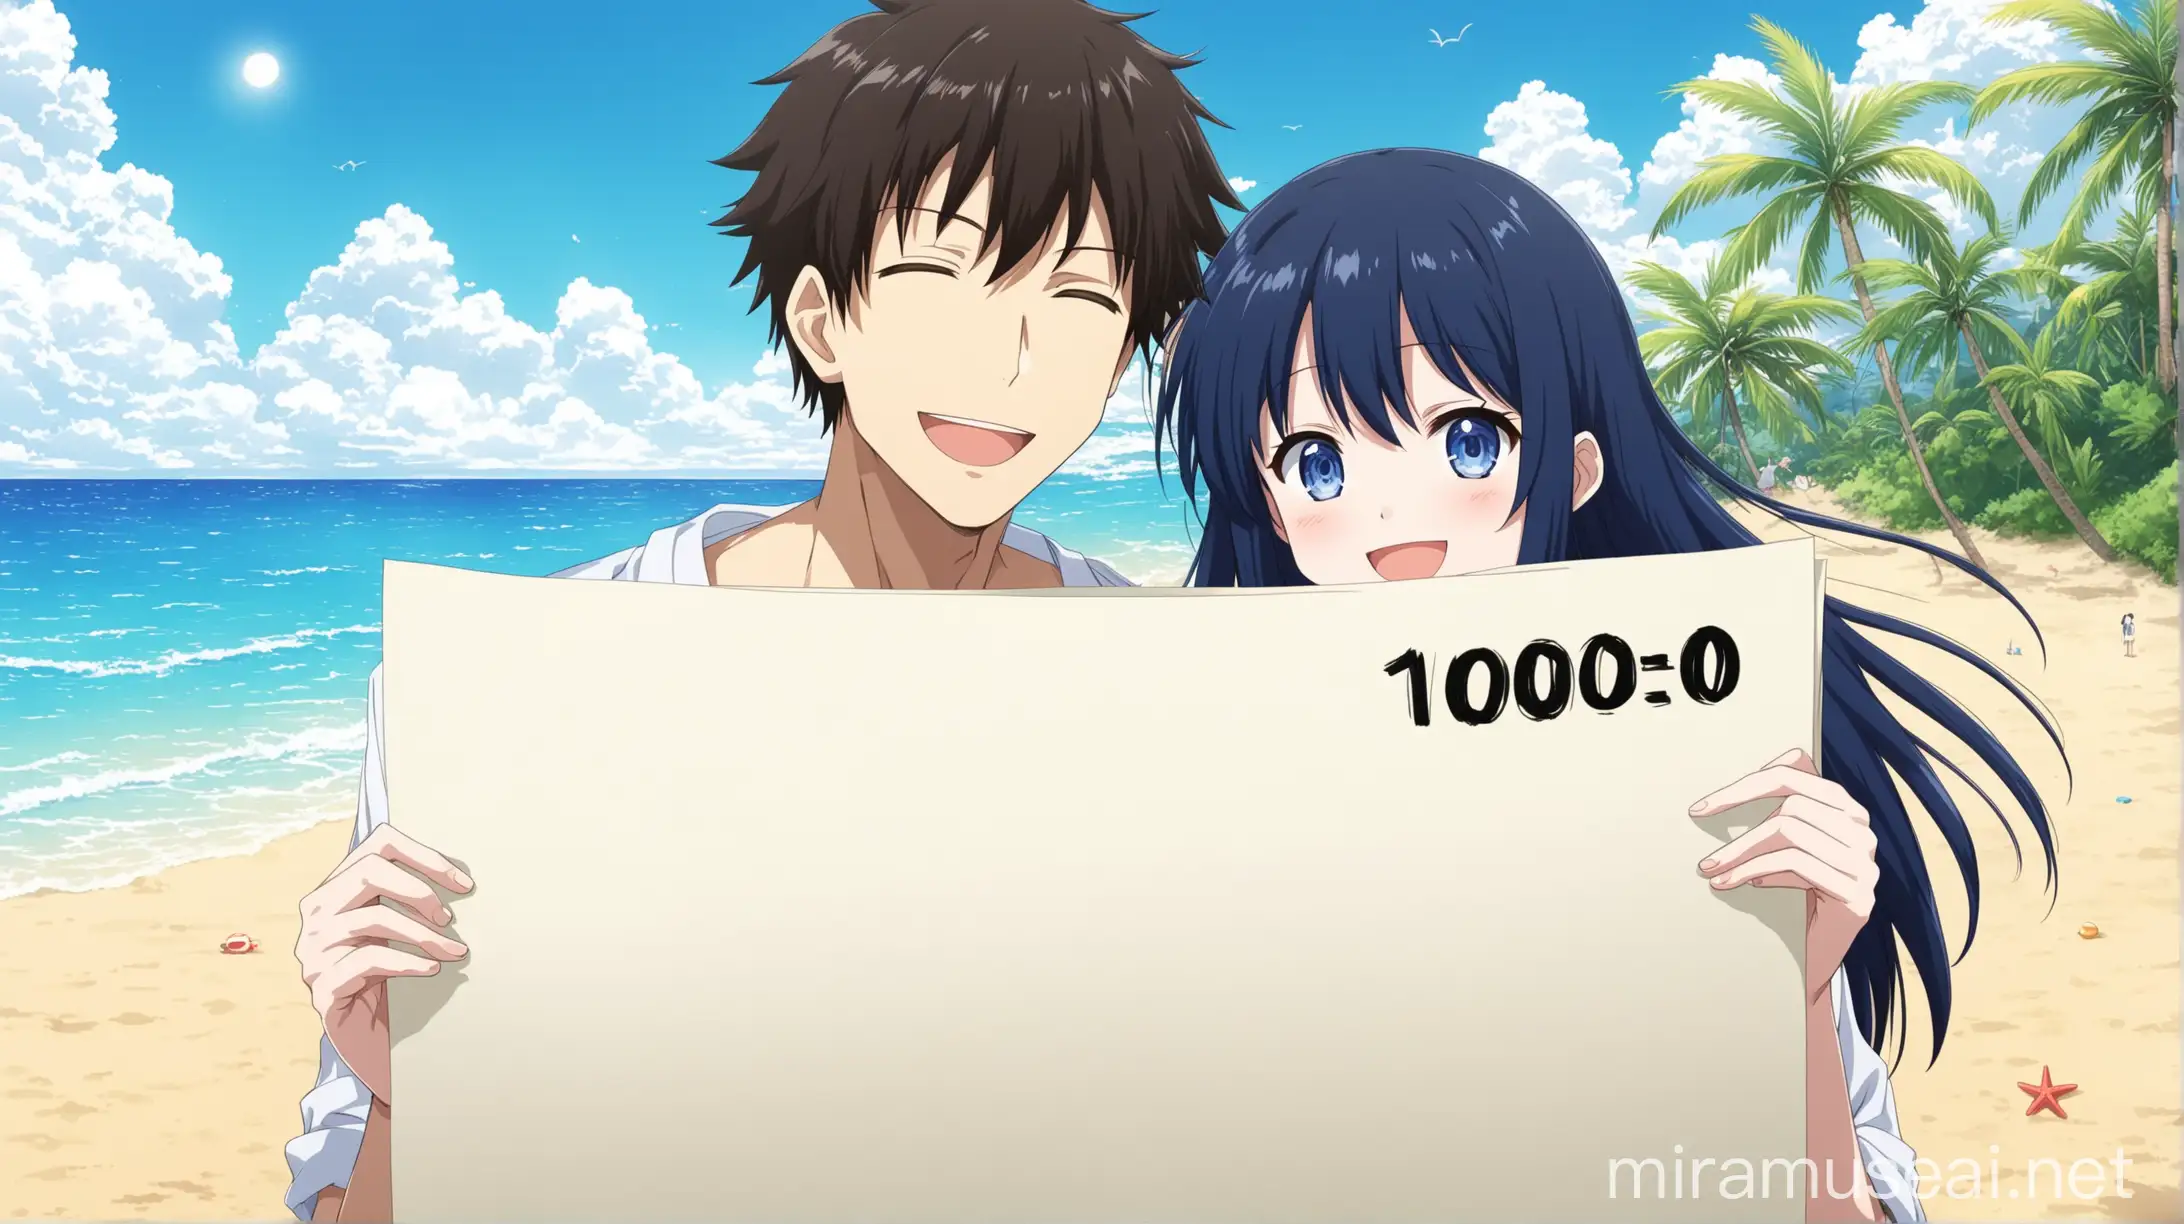 2 anime couple, with number 1000 big on paper holding ,happy
background beach